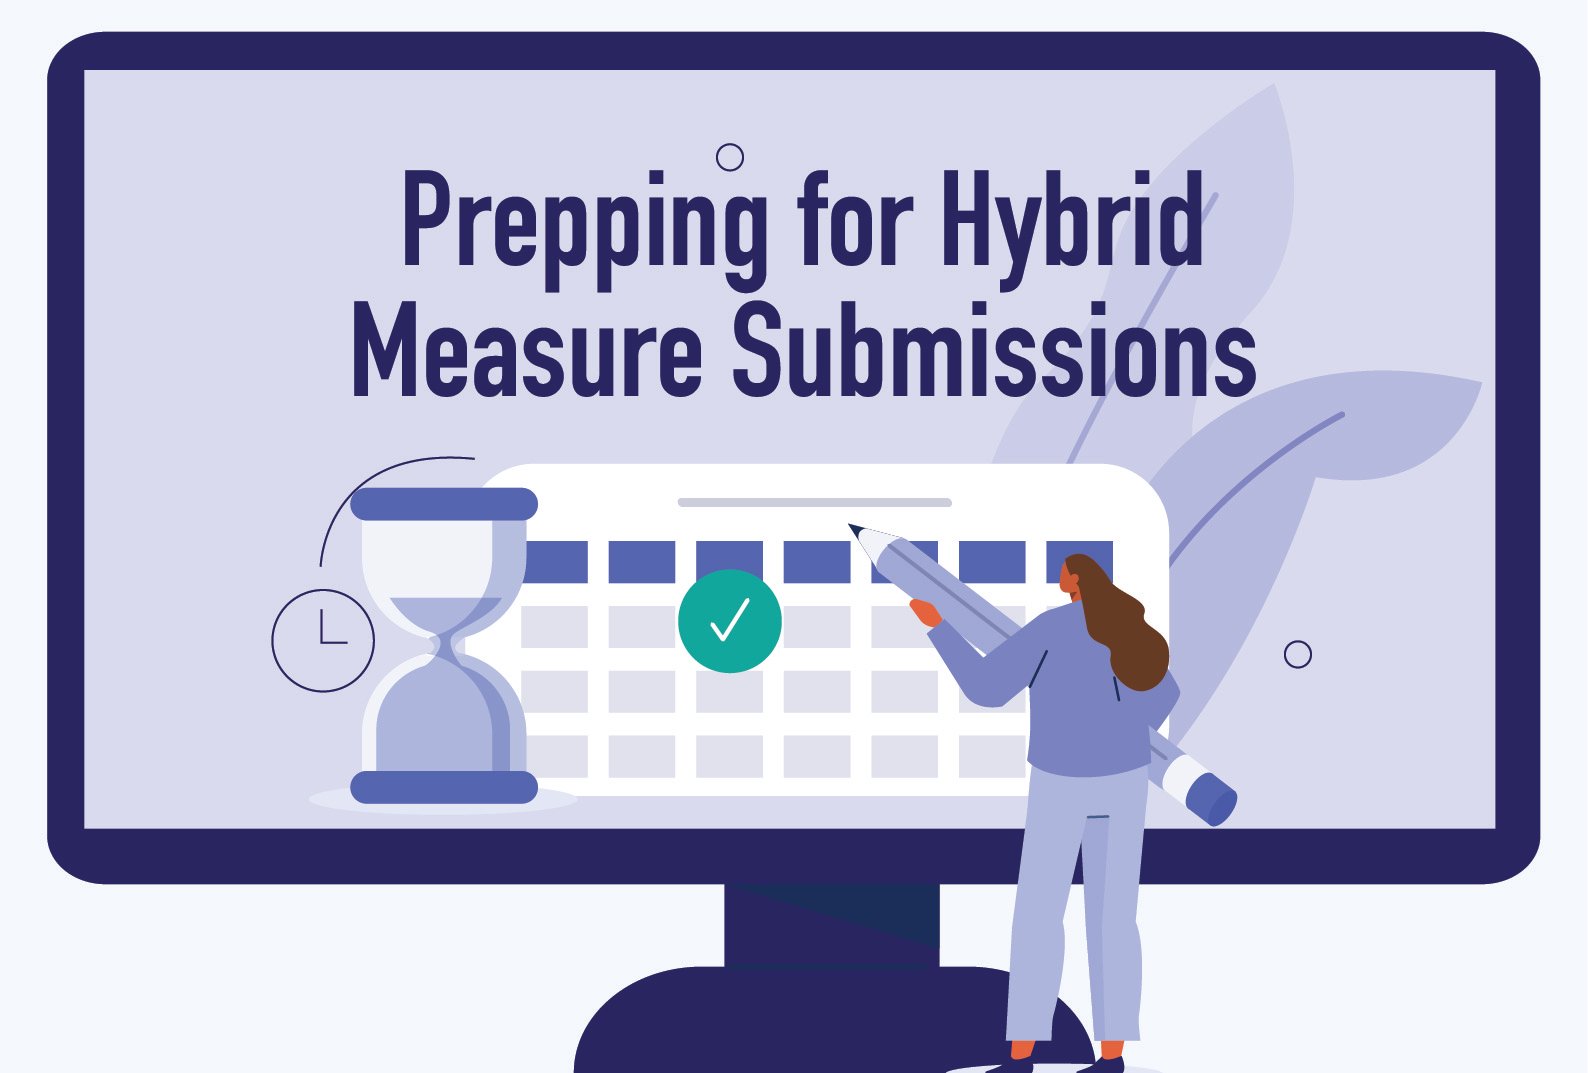 Prepping for hybrid measure submission